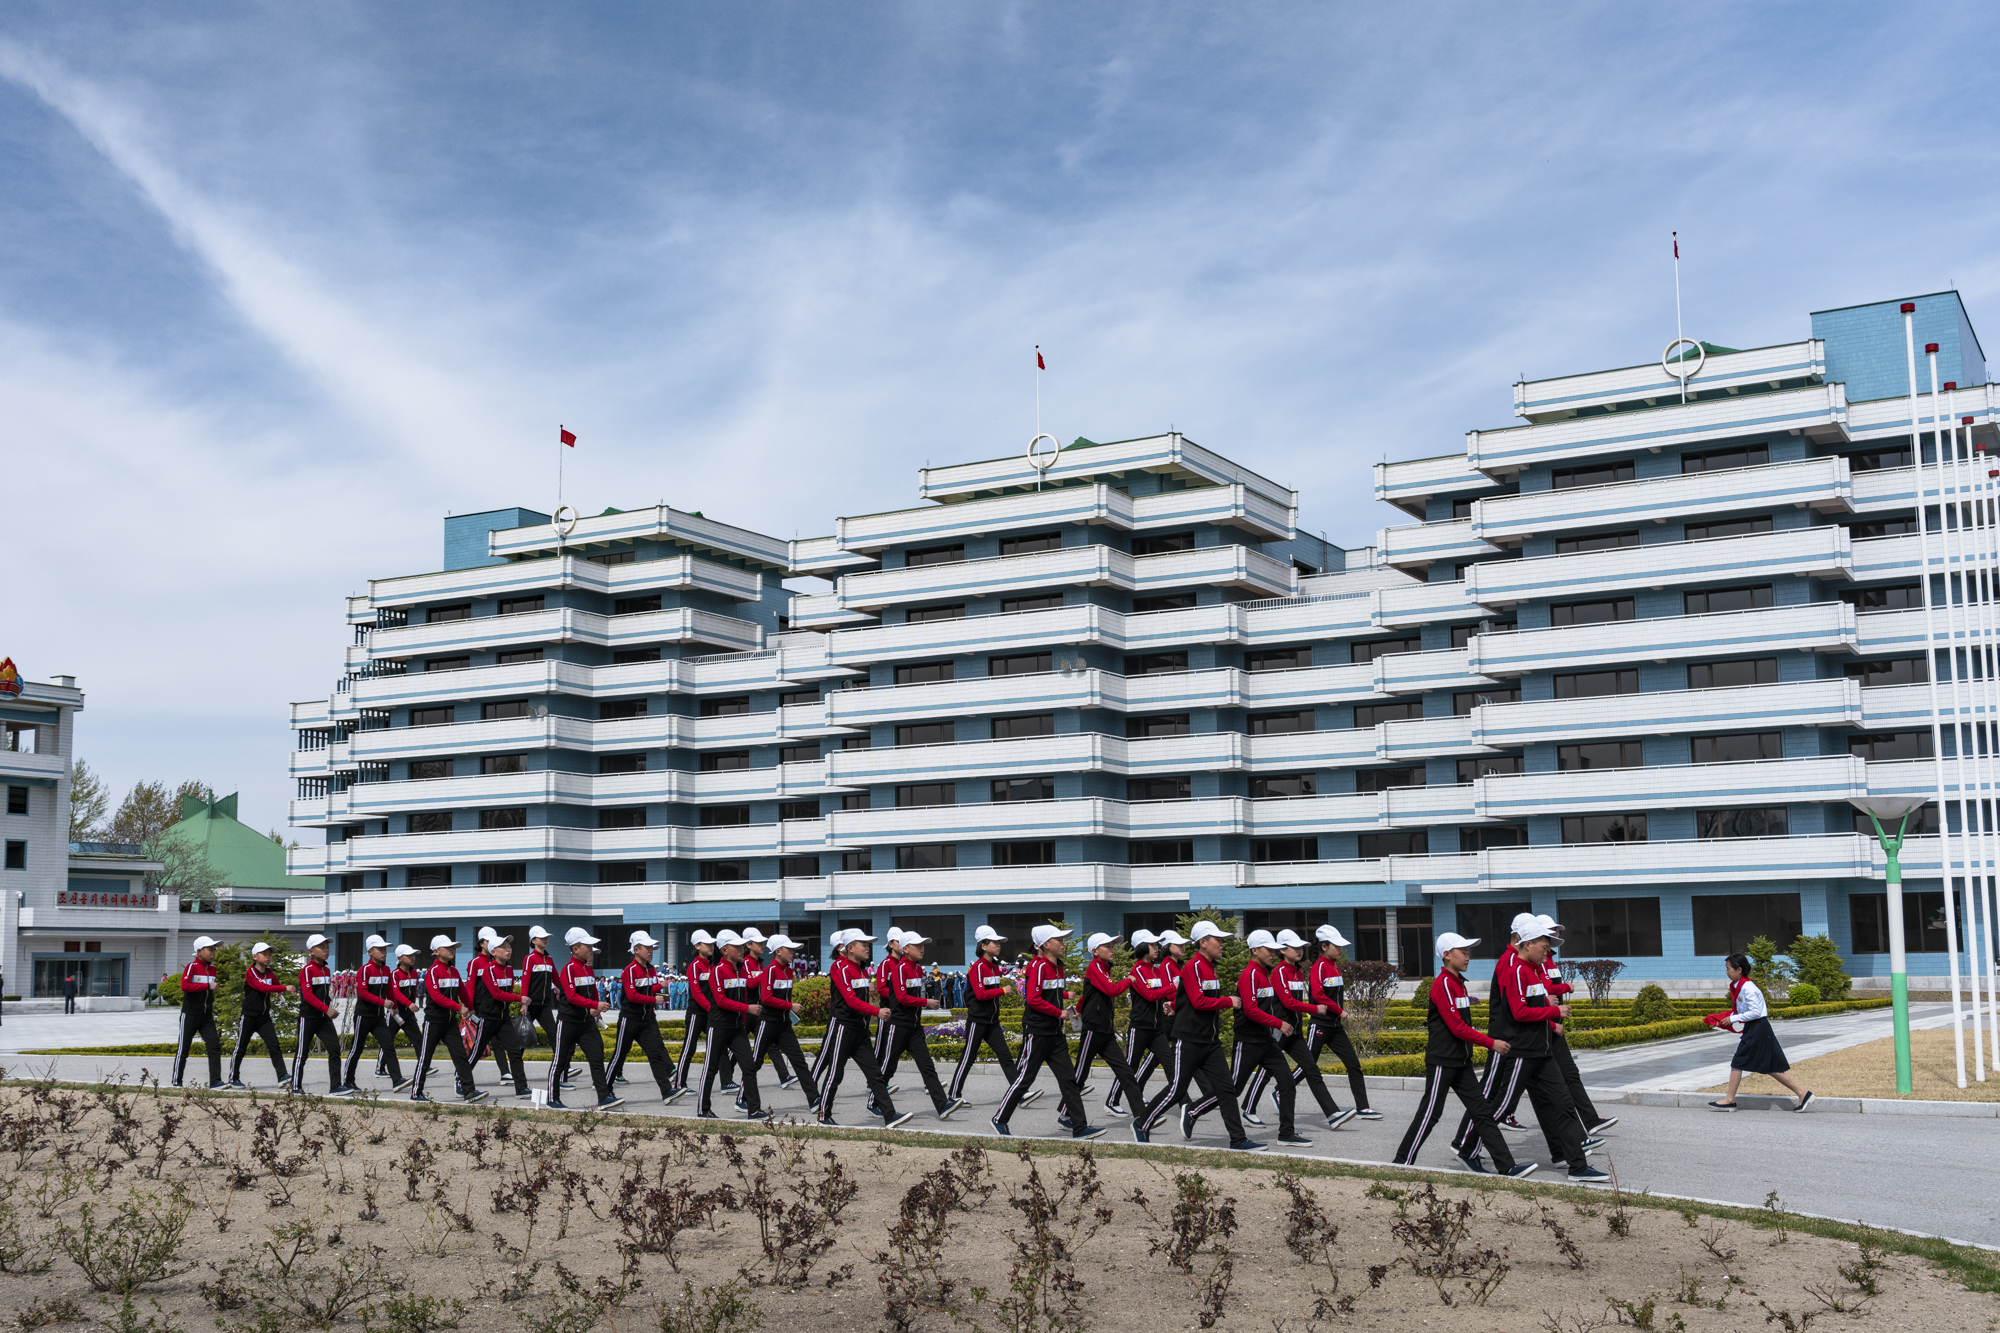  North Korean students marching in the front yard of the Songdowon International Children’s Camp, located in the Kangwŏn Province outside of Wŏnsan city.  The camp’s experience allows children to make connections worldwide, as well as helping open No